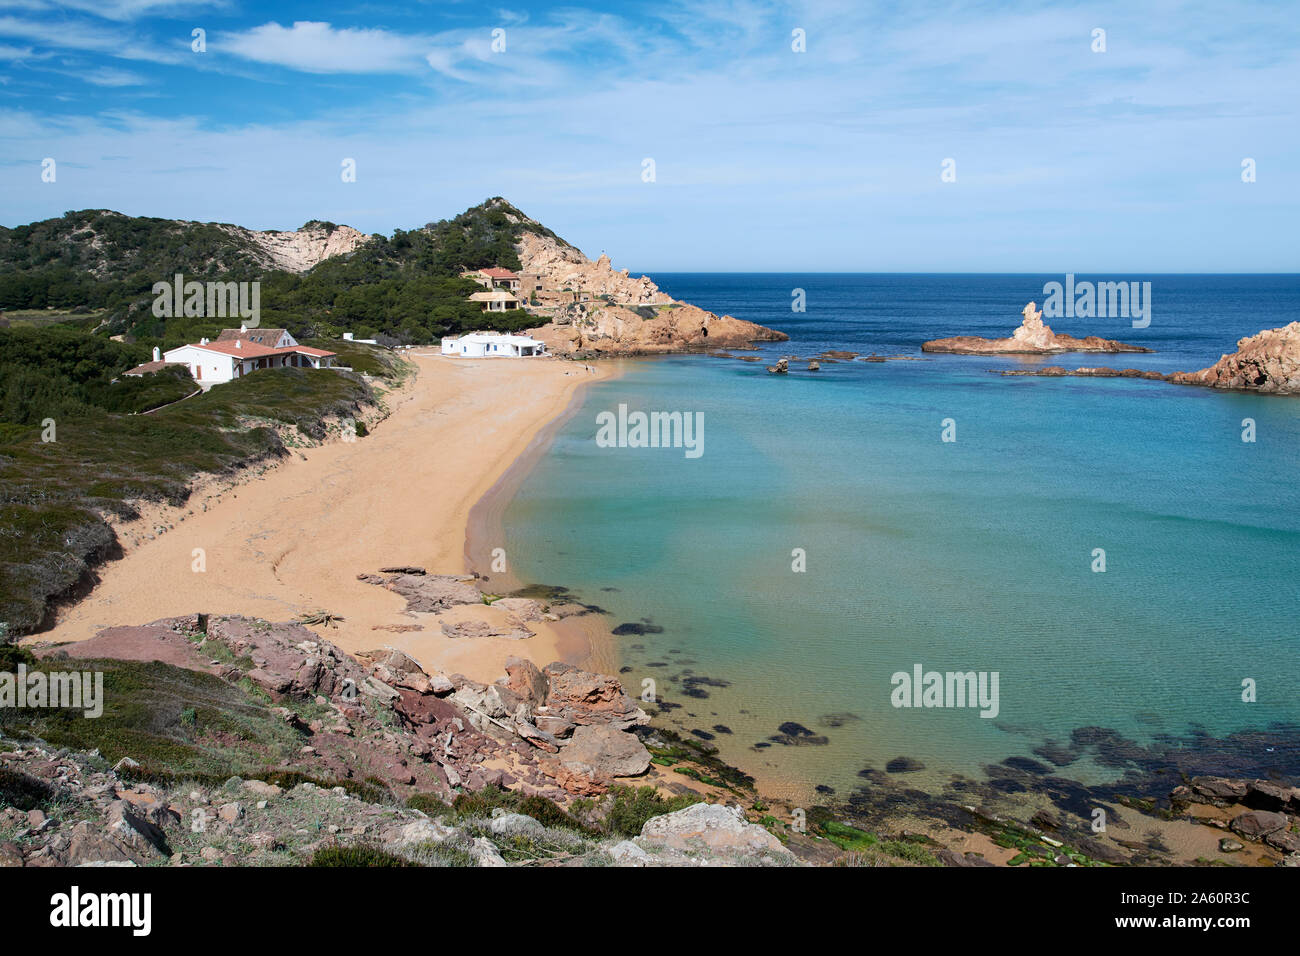 Scenic view of Balearic Islands against sky during sunny day, Spain Stock Photo